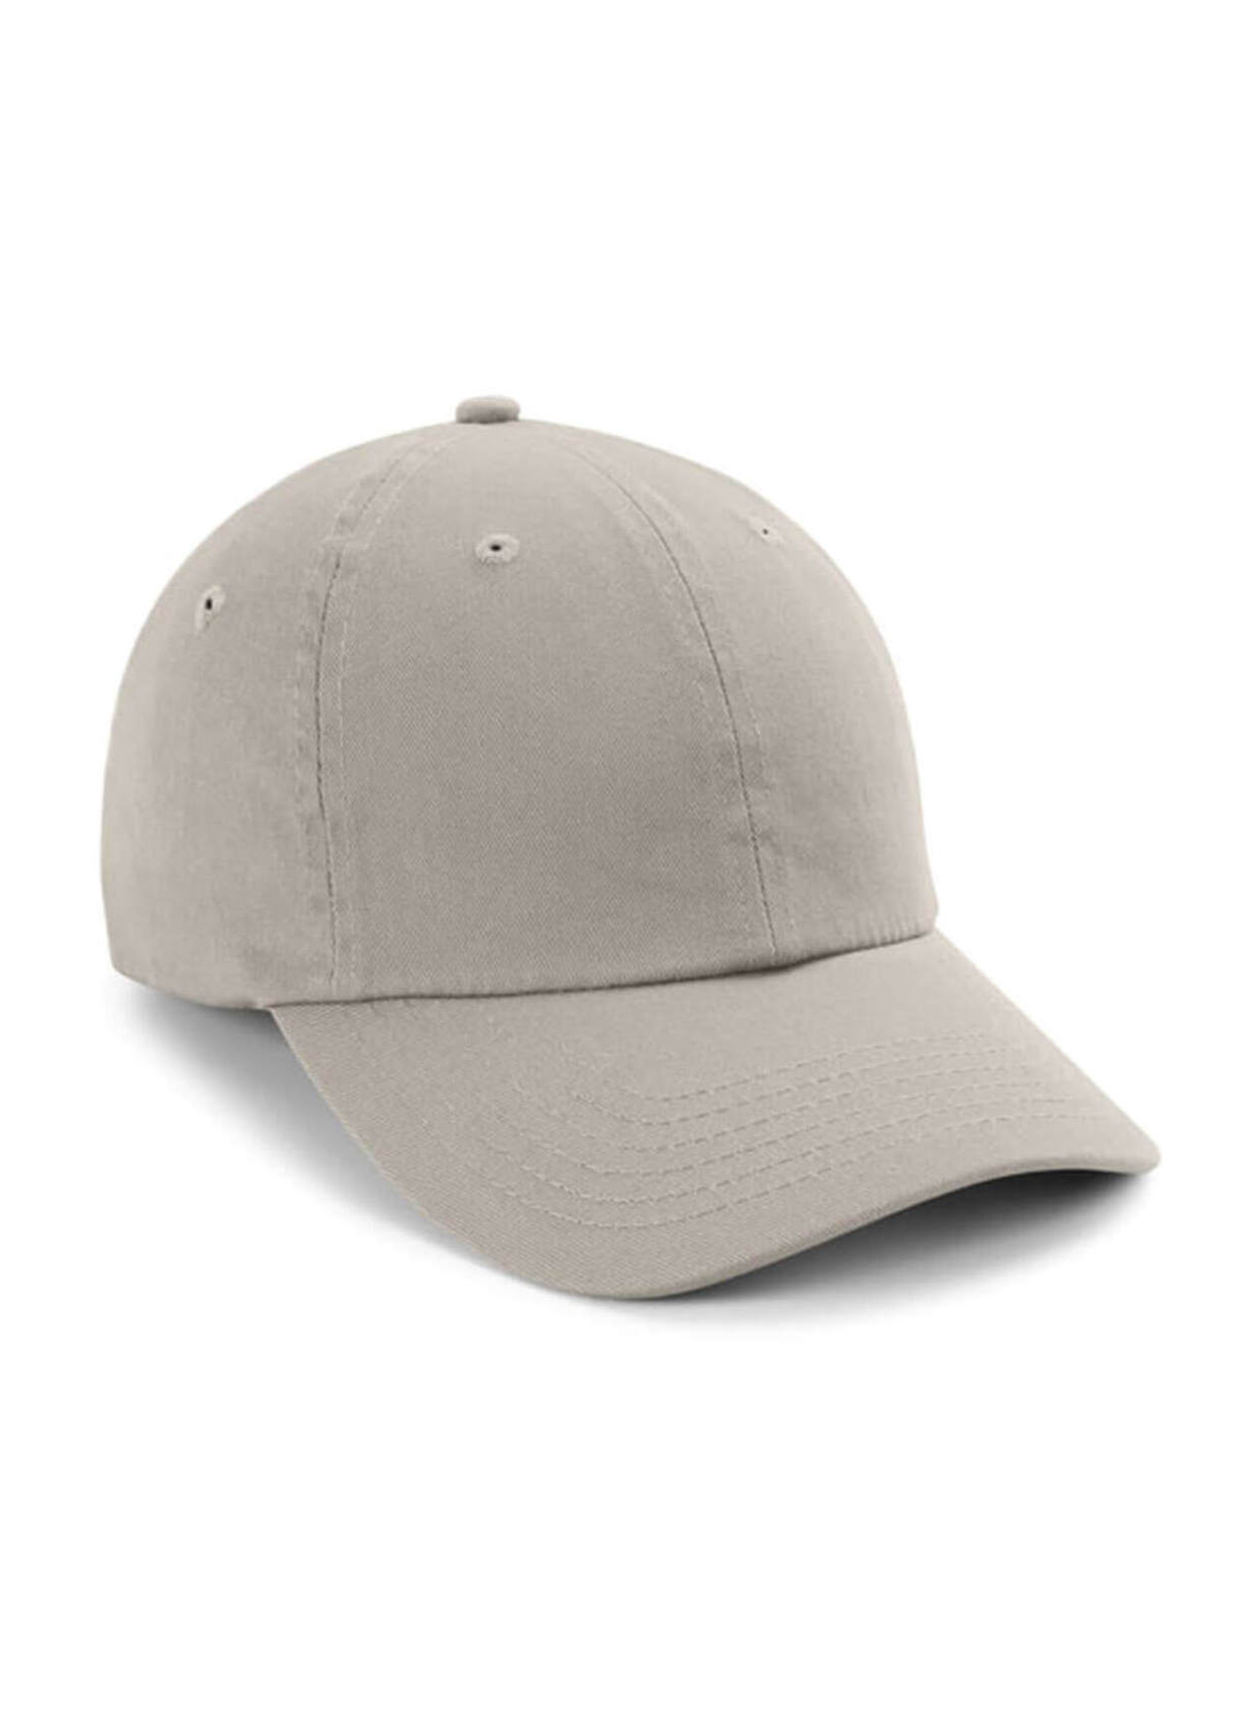 Imperial Putty The Original Buckle Hat